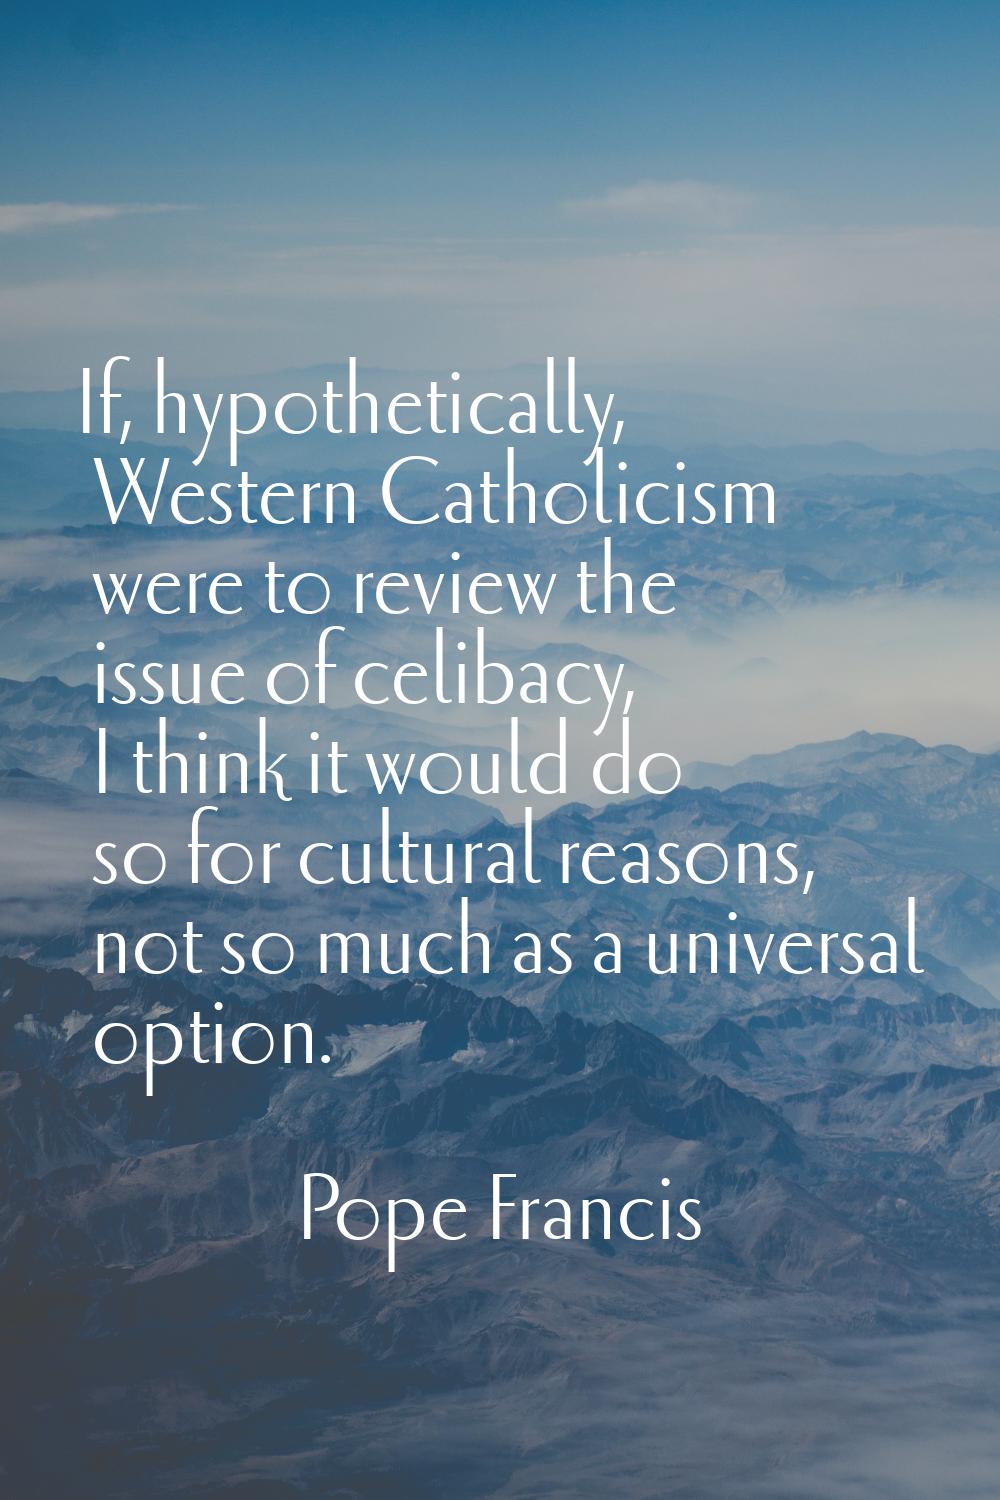 If, hypothetically, Western Catholicism were to review the issue of celibacy, I think it would do s